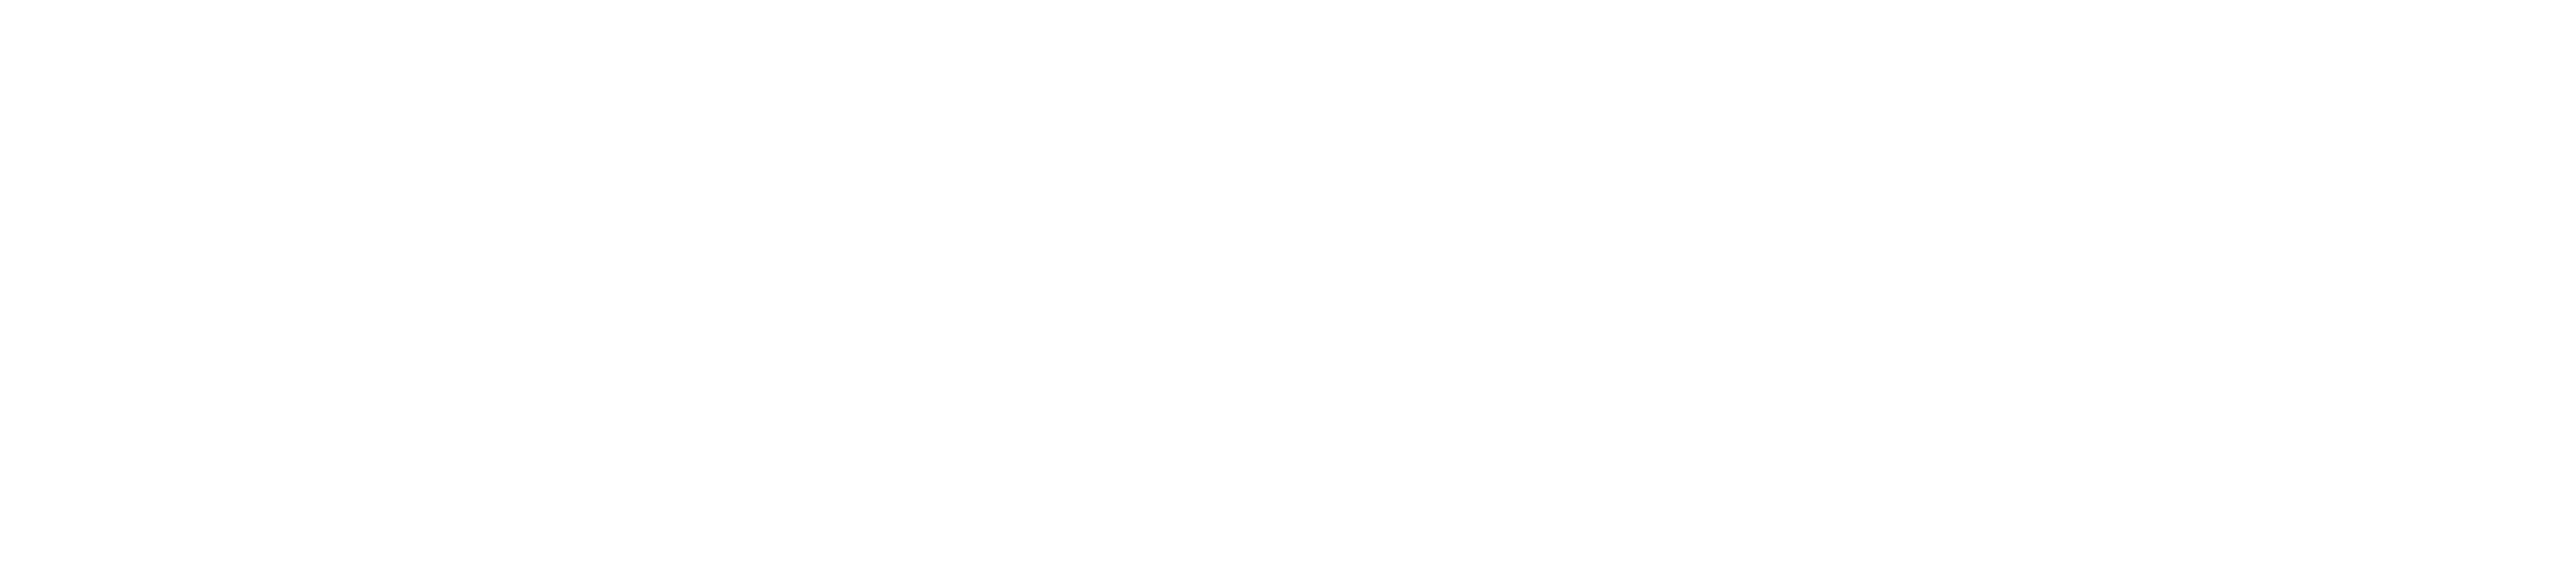 High Line Canal Trail Map